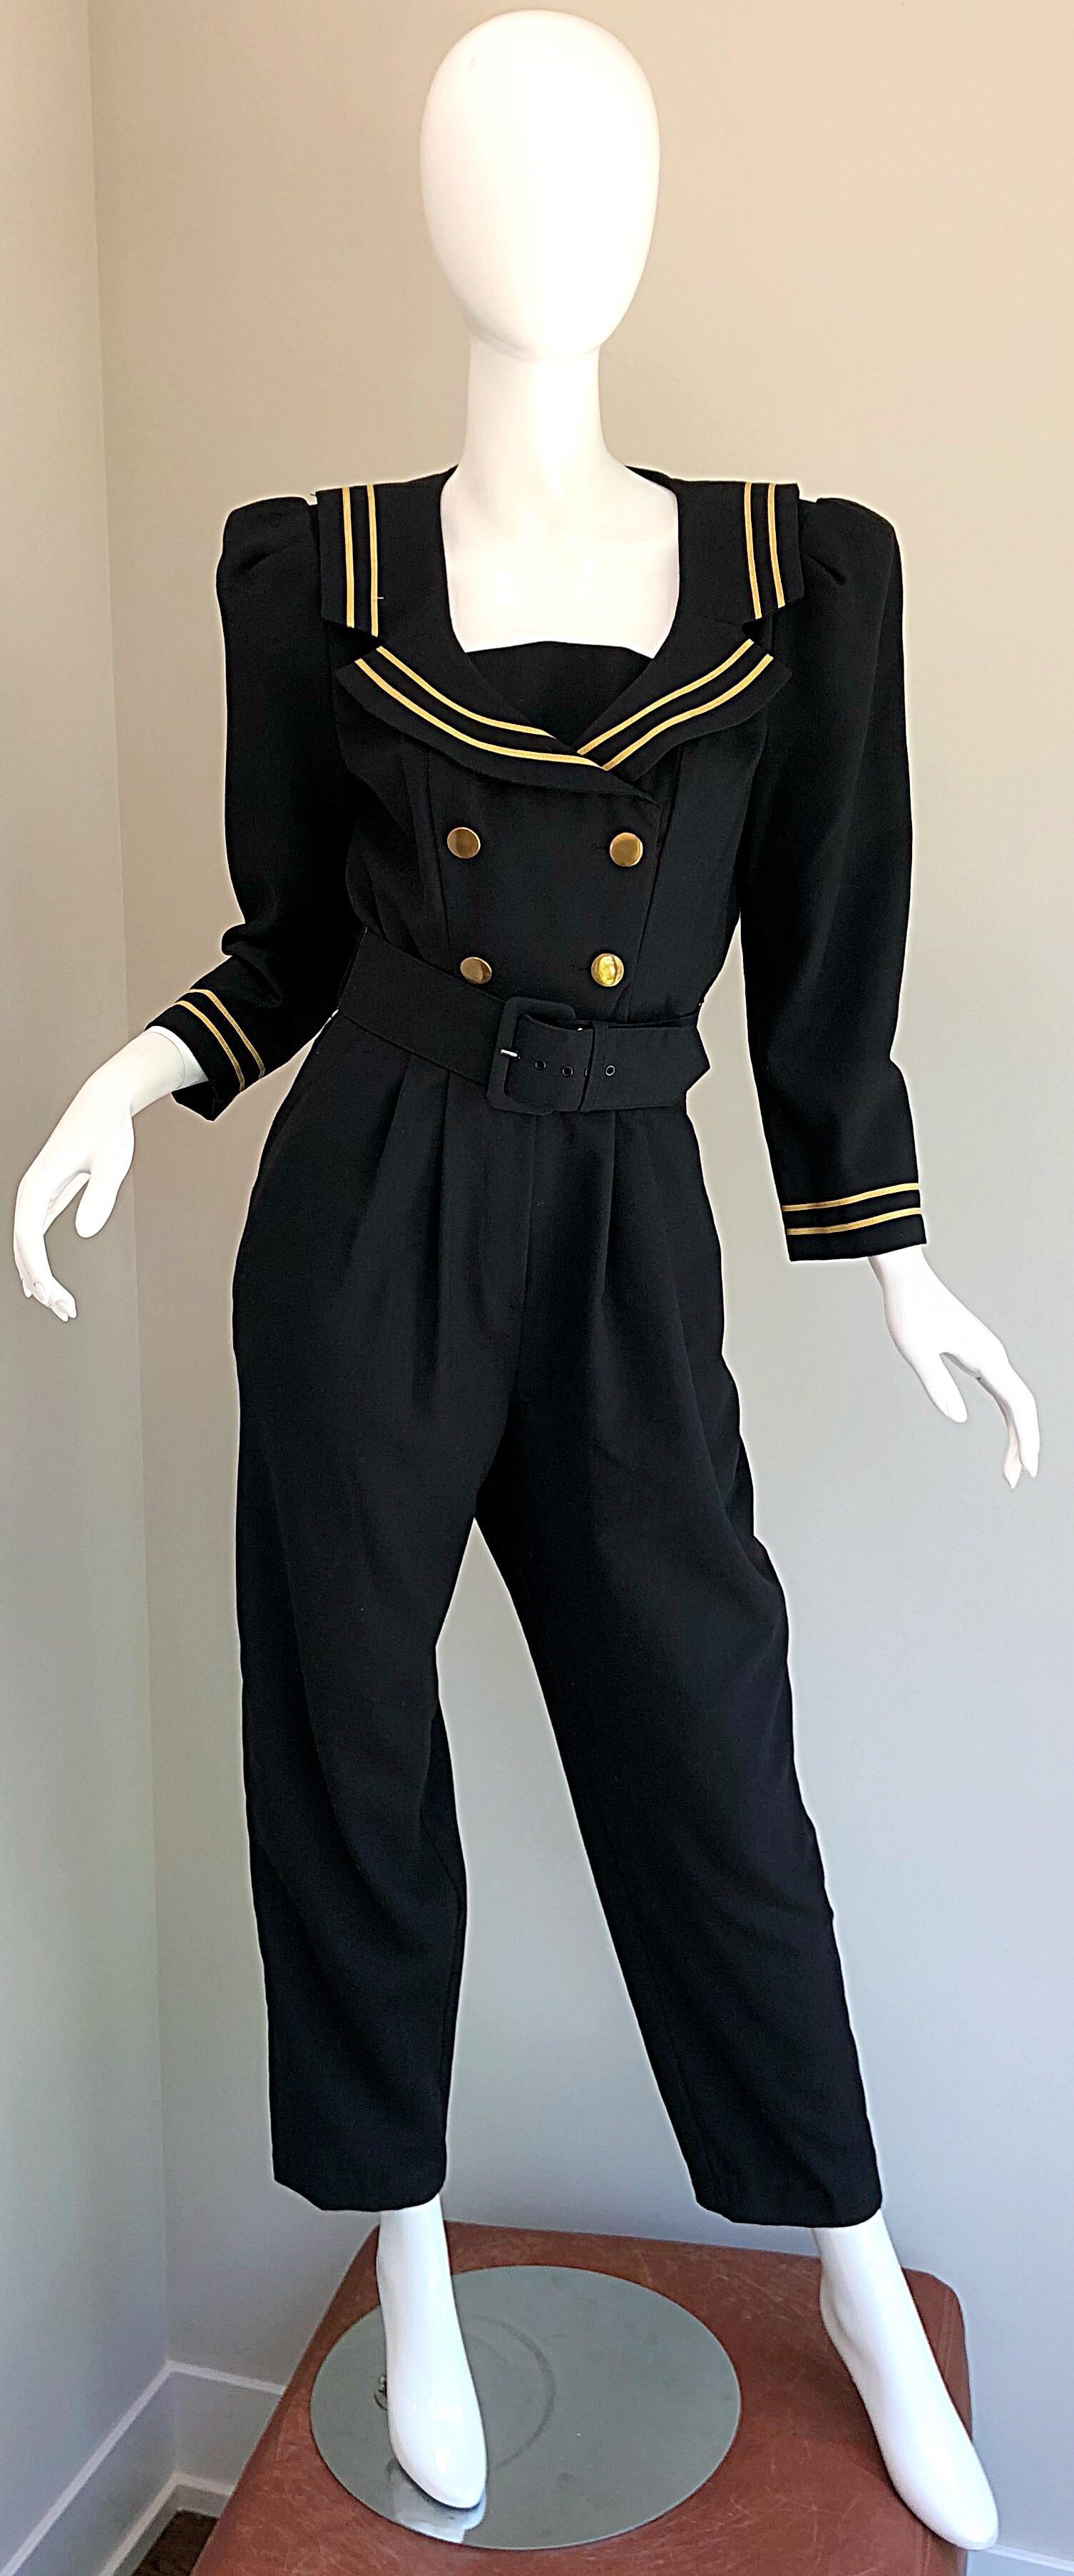 Incredible vintage nautical belted jumpsuit! Soft black rayon blend fabric. Double breasted style it's muted gold buttons up the front. Shelf bust attaches to interior buttons, and can be worn with or without. Strong shoulders, with shoulder pads